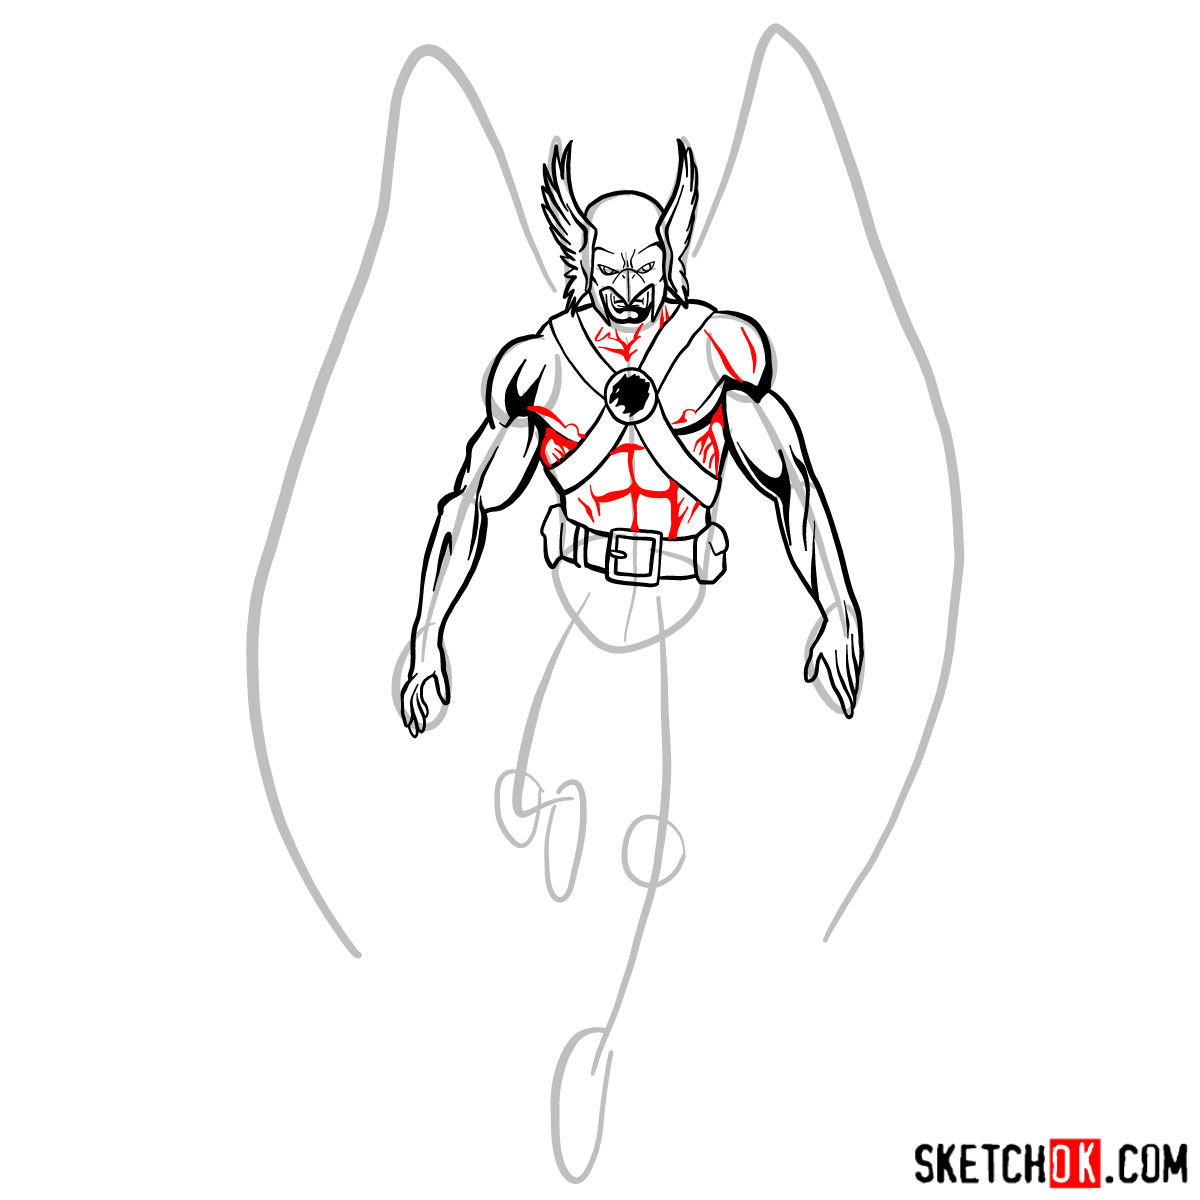 How to draw Hawkman from DC Comics - step 10